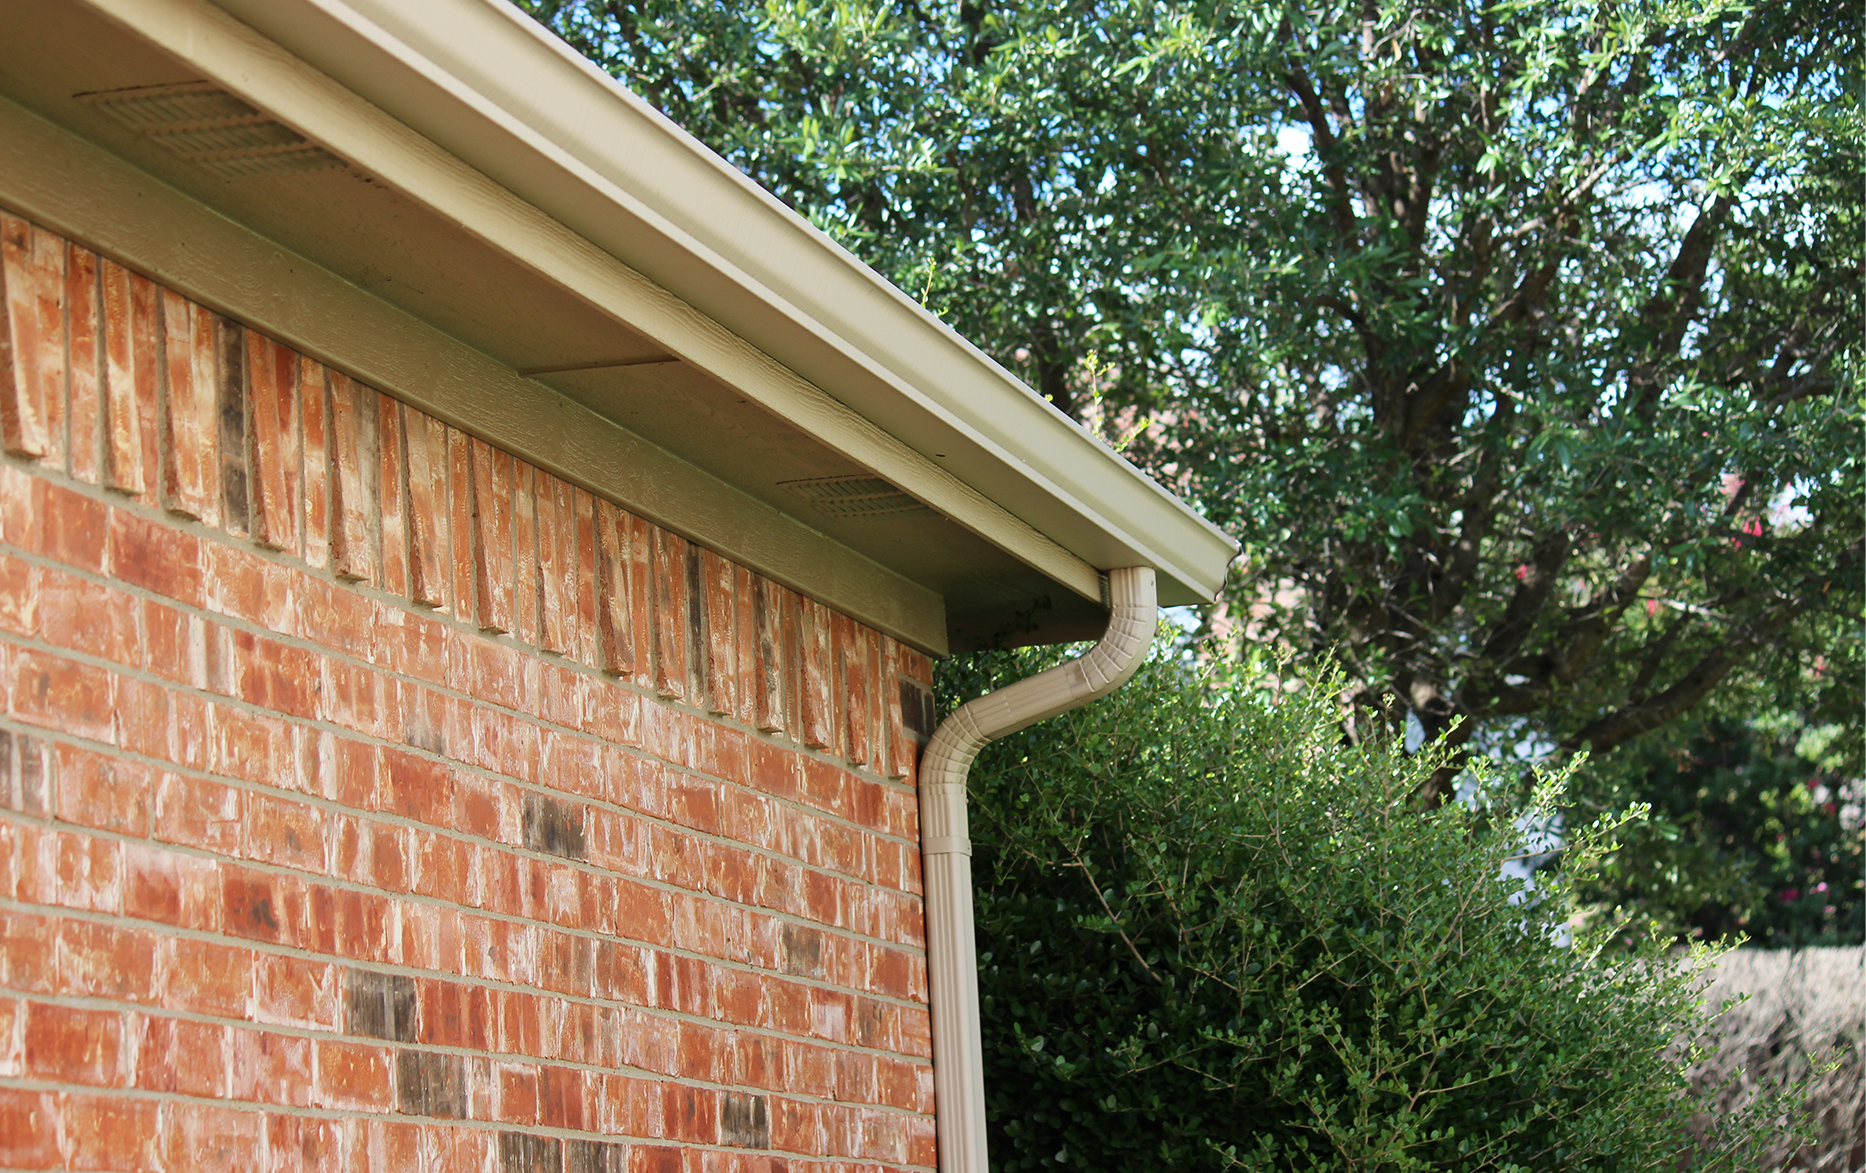 How to Clean Rain Gutters